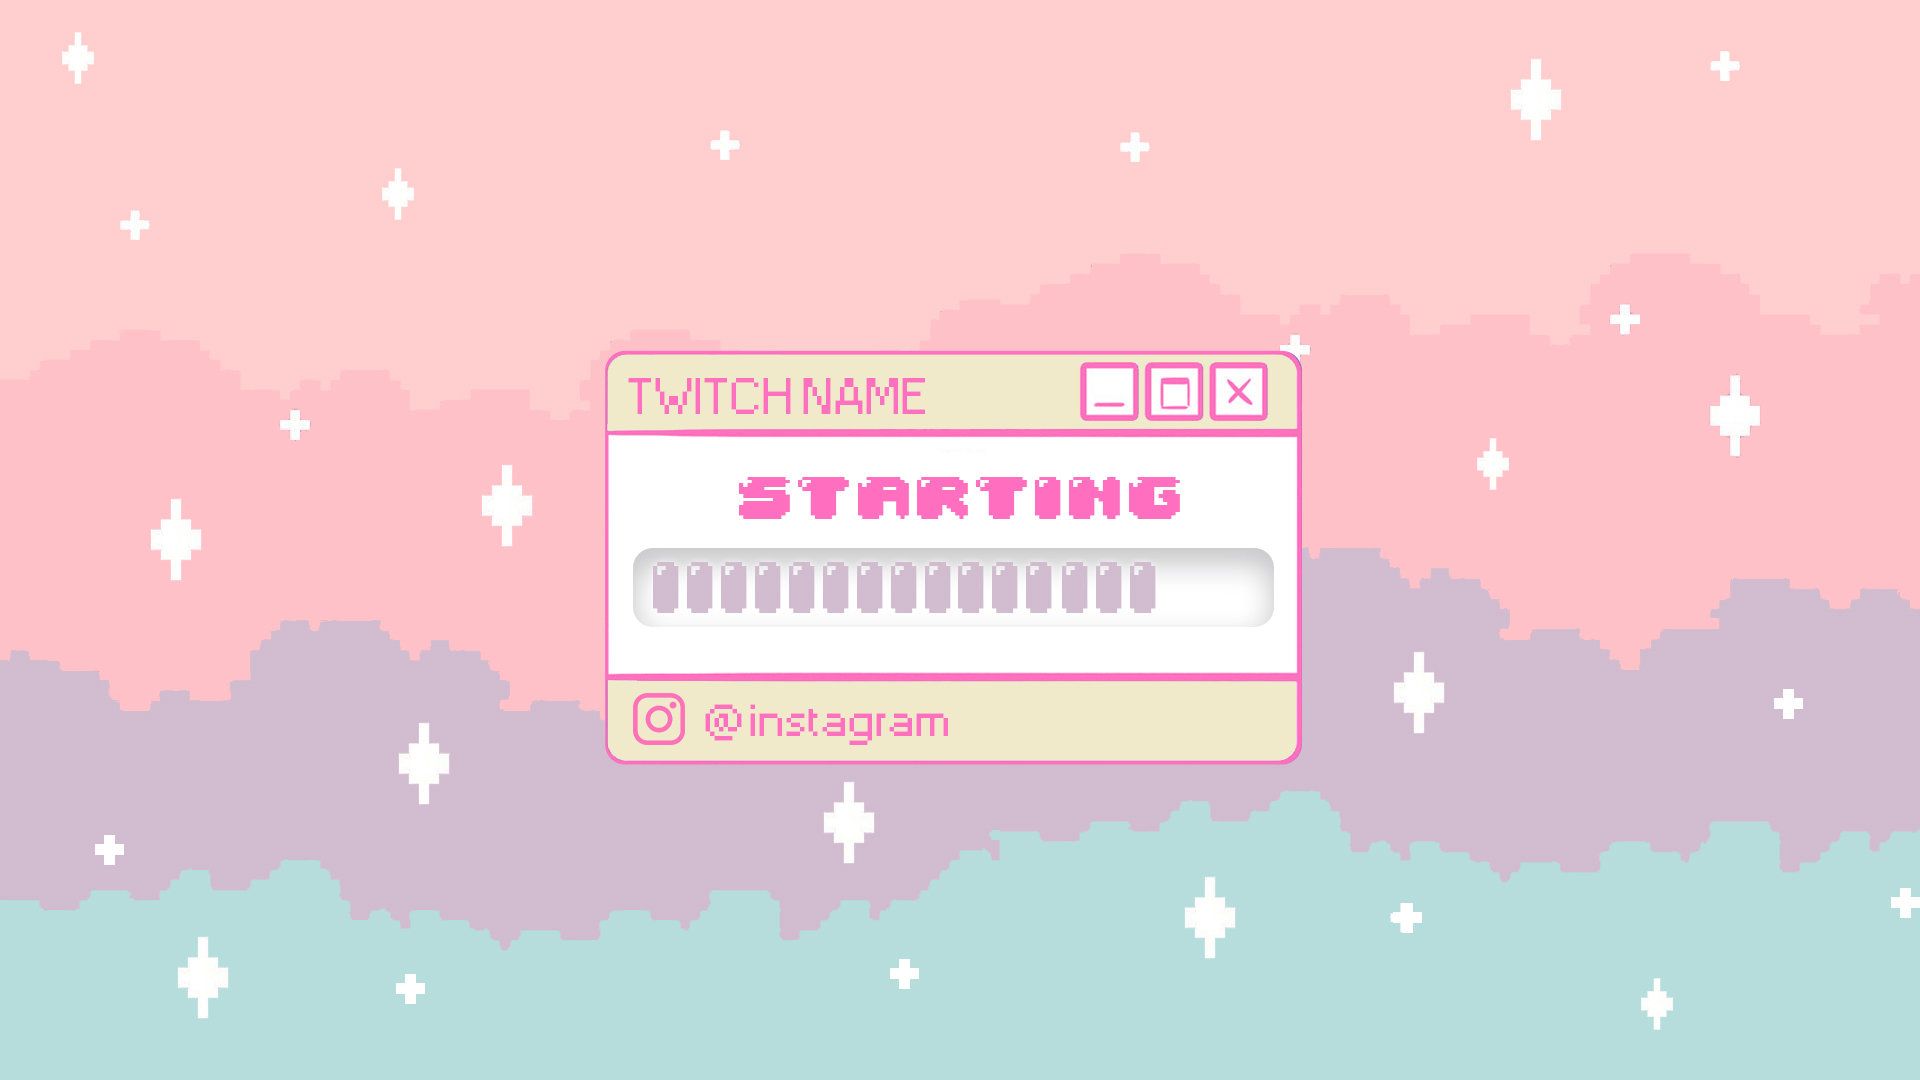  Twitch Hintergrundbild 1920x1080. Cute Animated Loading Twitch Stream Package Video Game Theme. Twitch, Game themes, Twitch streaming setup